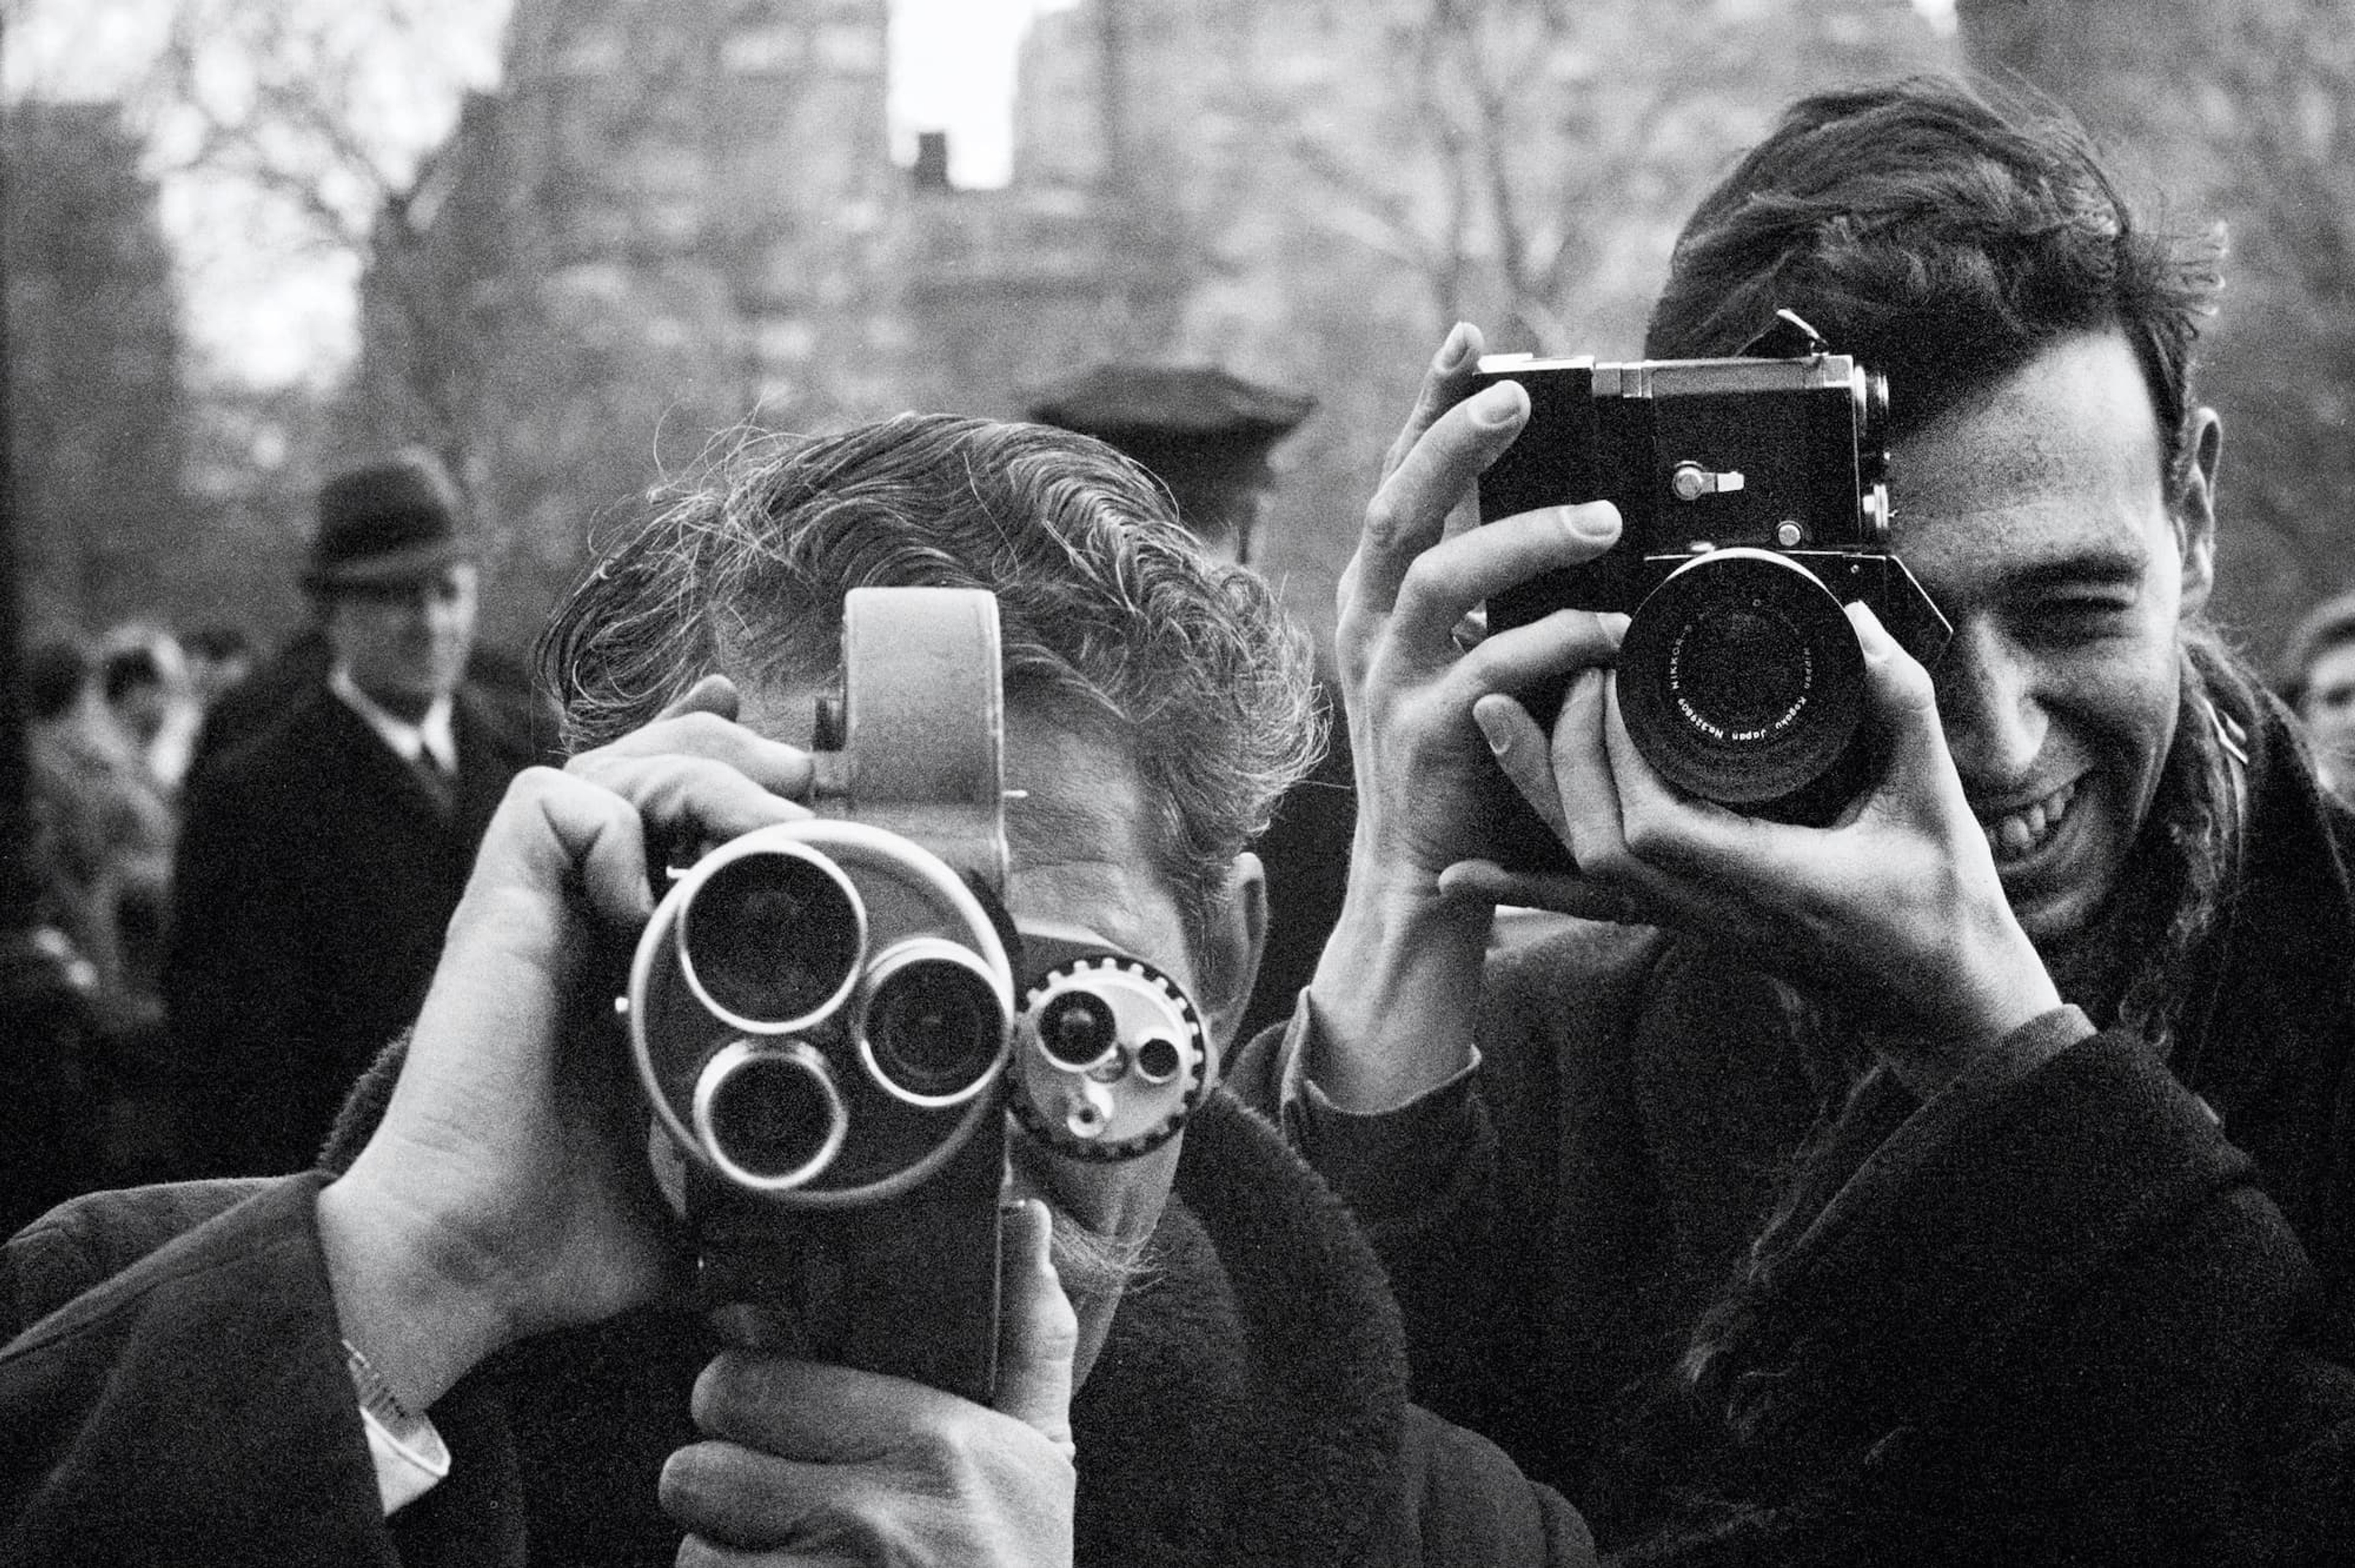 Black and white photograph taken by Paul McCartney of press photographers